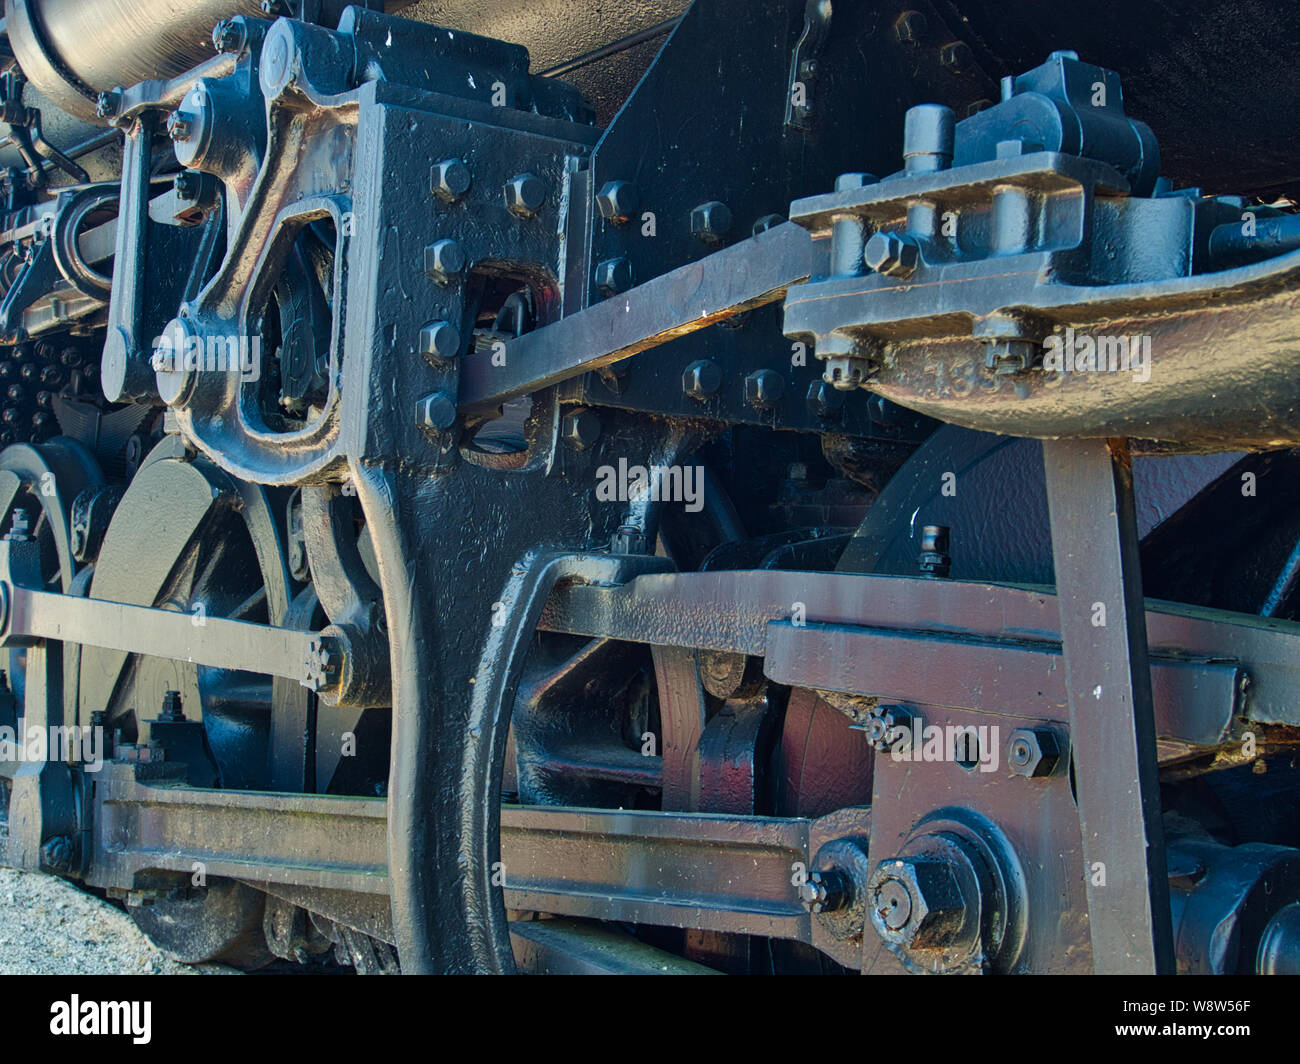 Drive wheel and piston rods of a rail road steam engine Stock Photo